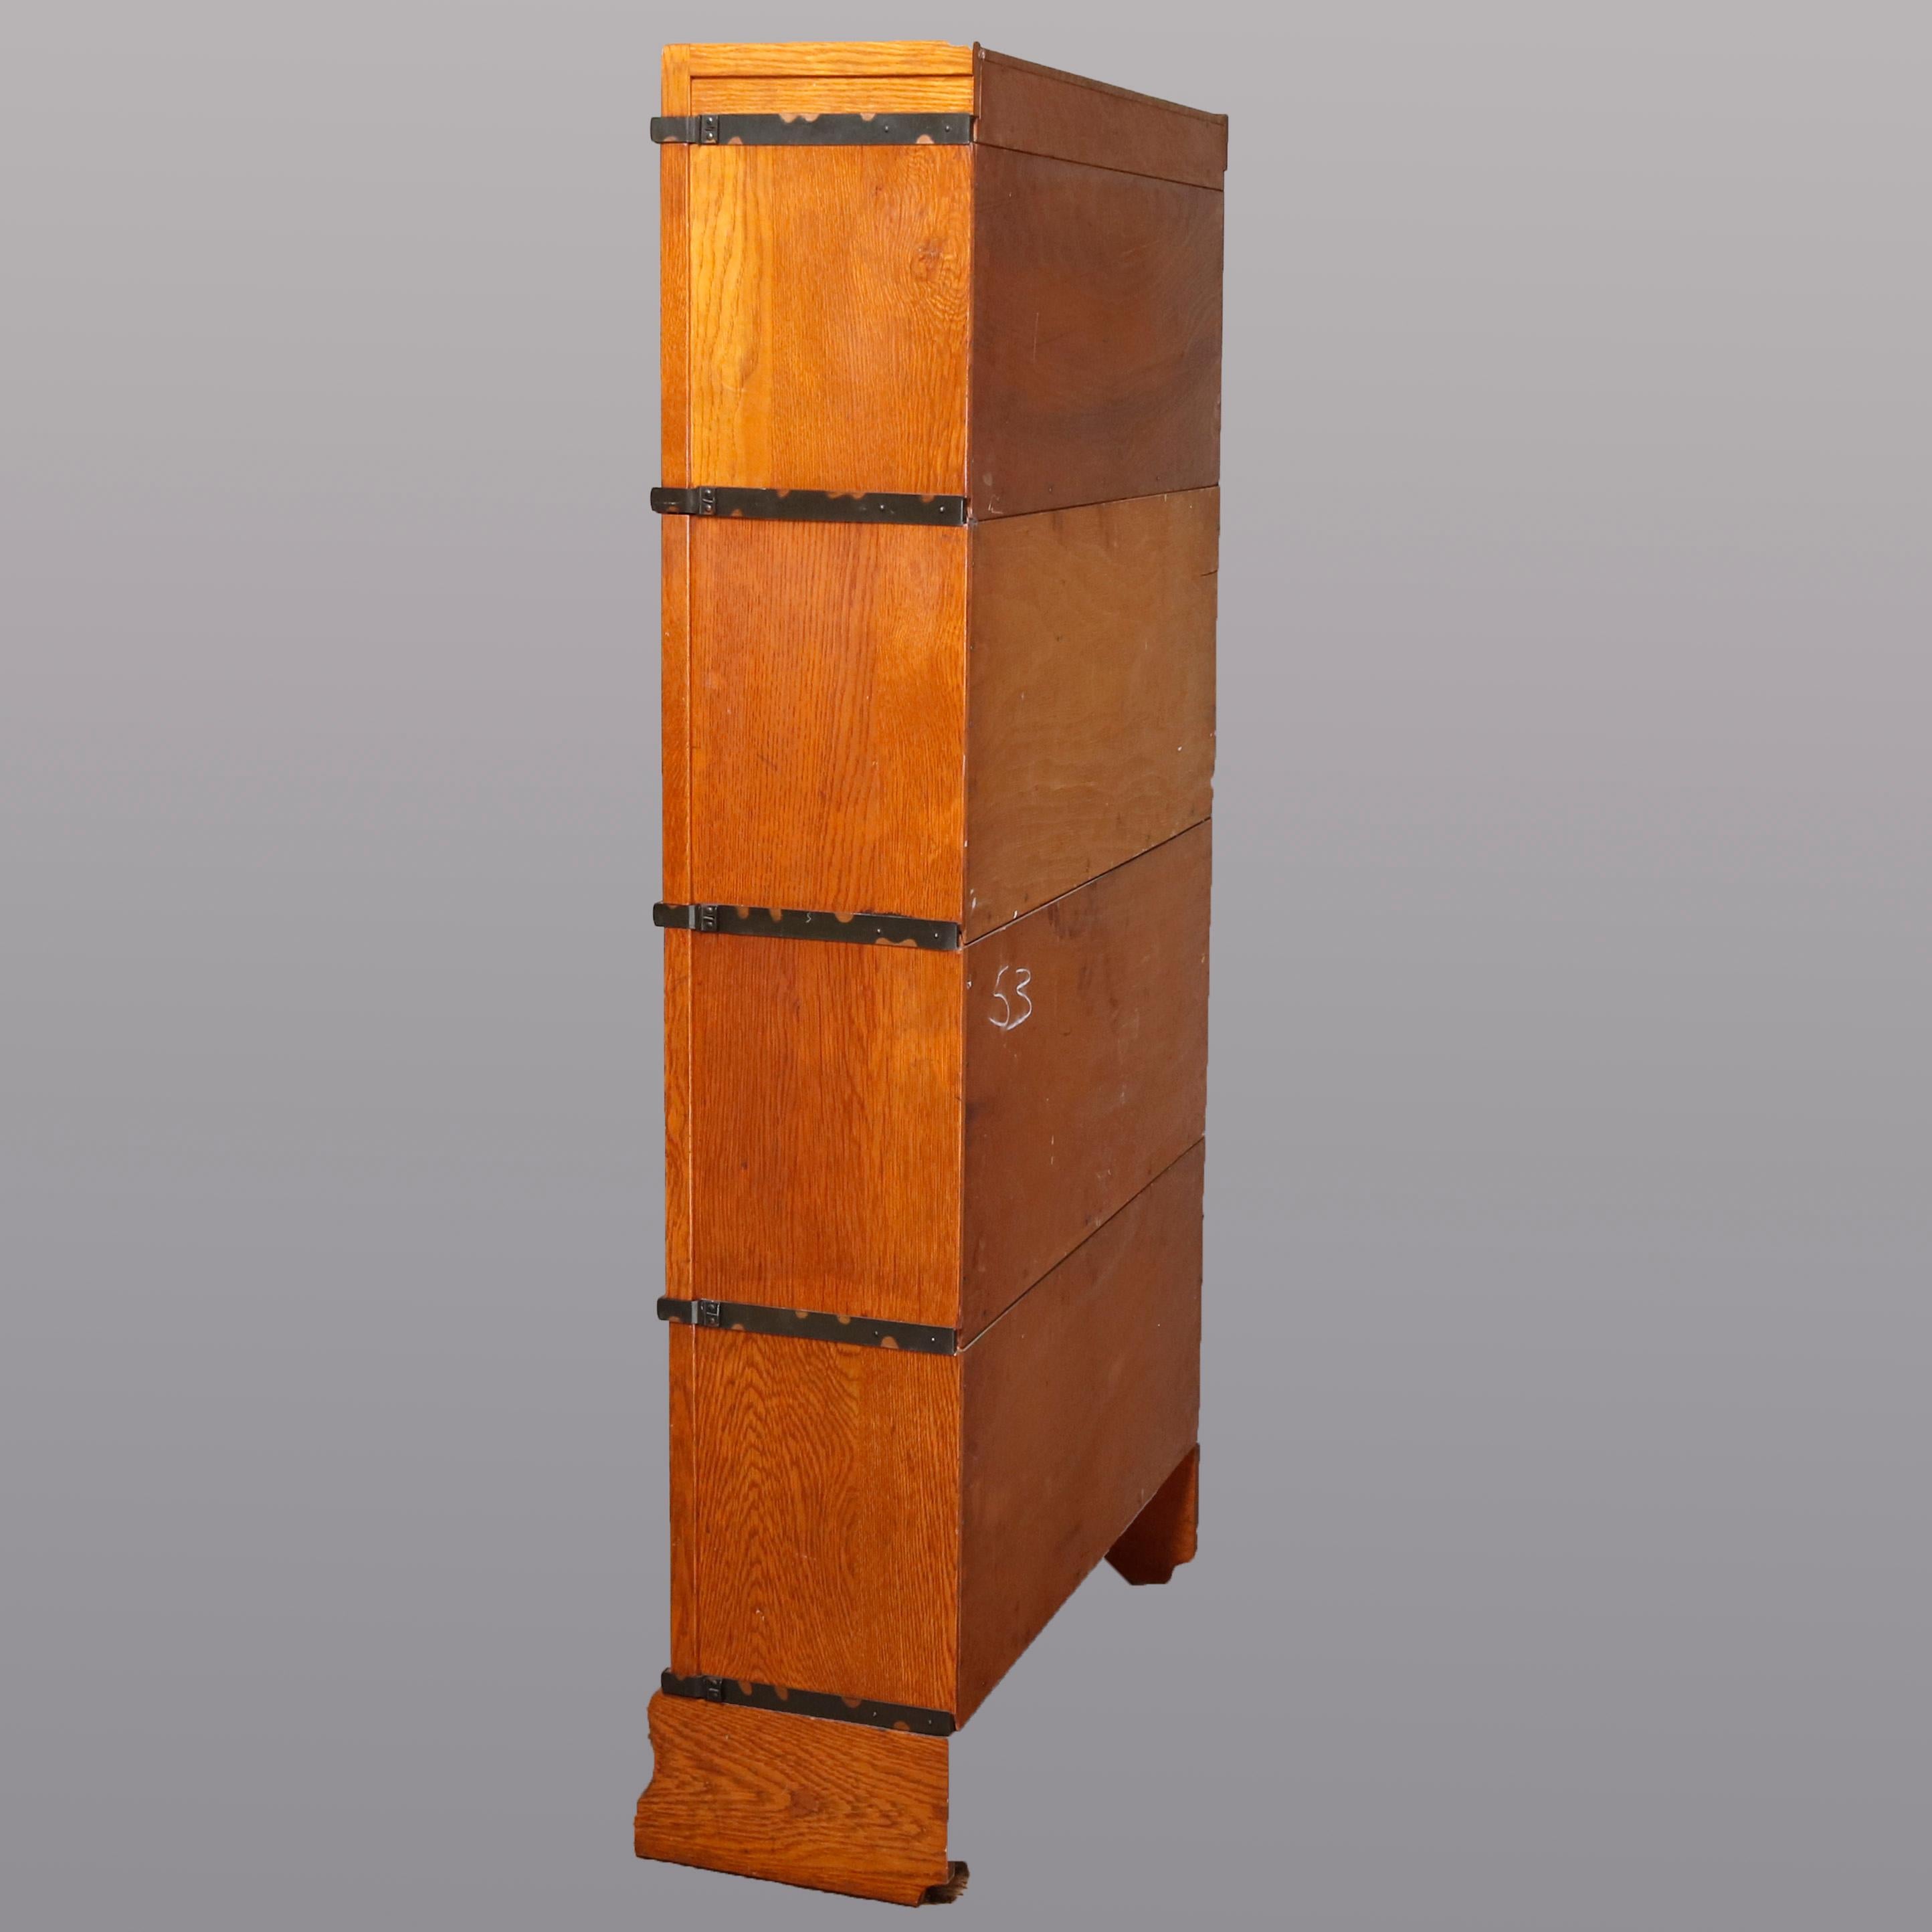 An Arts & Crafts sectional barrister bookcase by Globe-Wernicke Pattern 110, Grade 198, offers quarter sawn oak construction with four stacks each having a pull-down glass door on shaped base surmounted by removable crown, circa 1920

Measures -